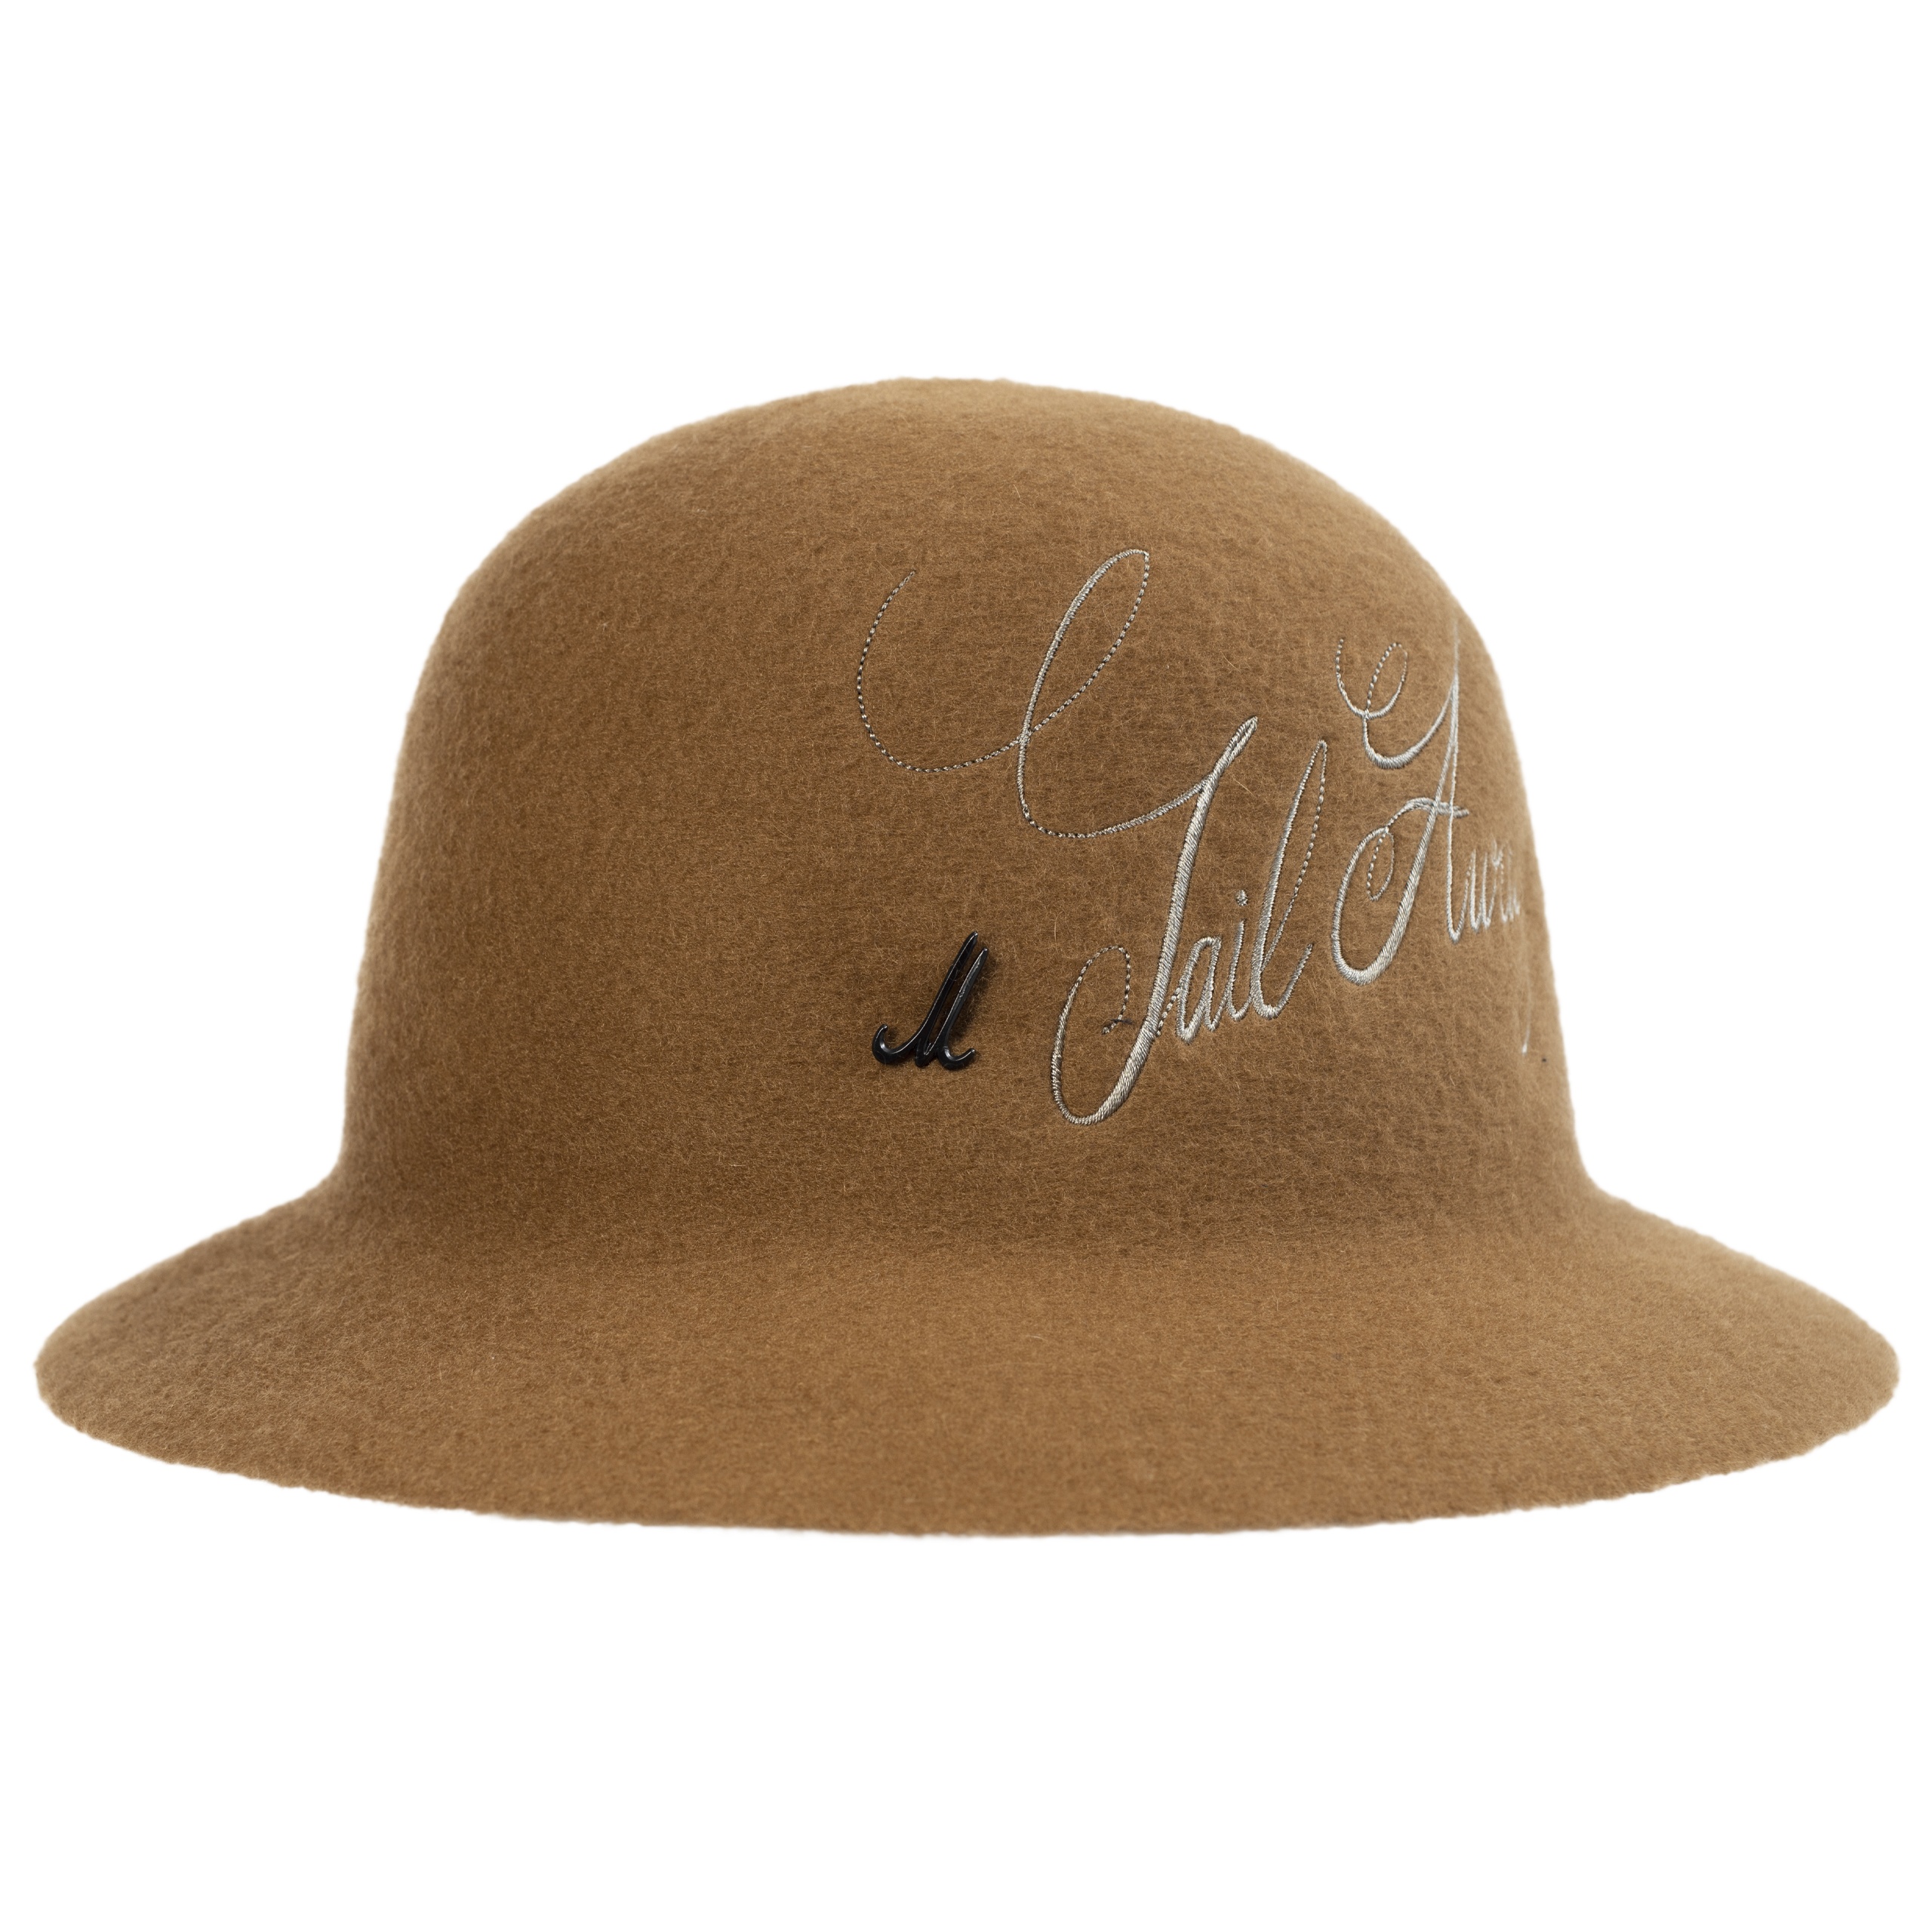 EMBROIDERED LOGO HAT IN BROWN - 1